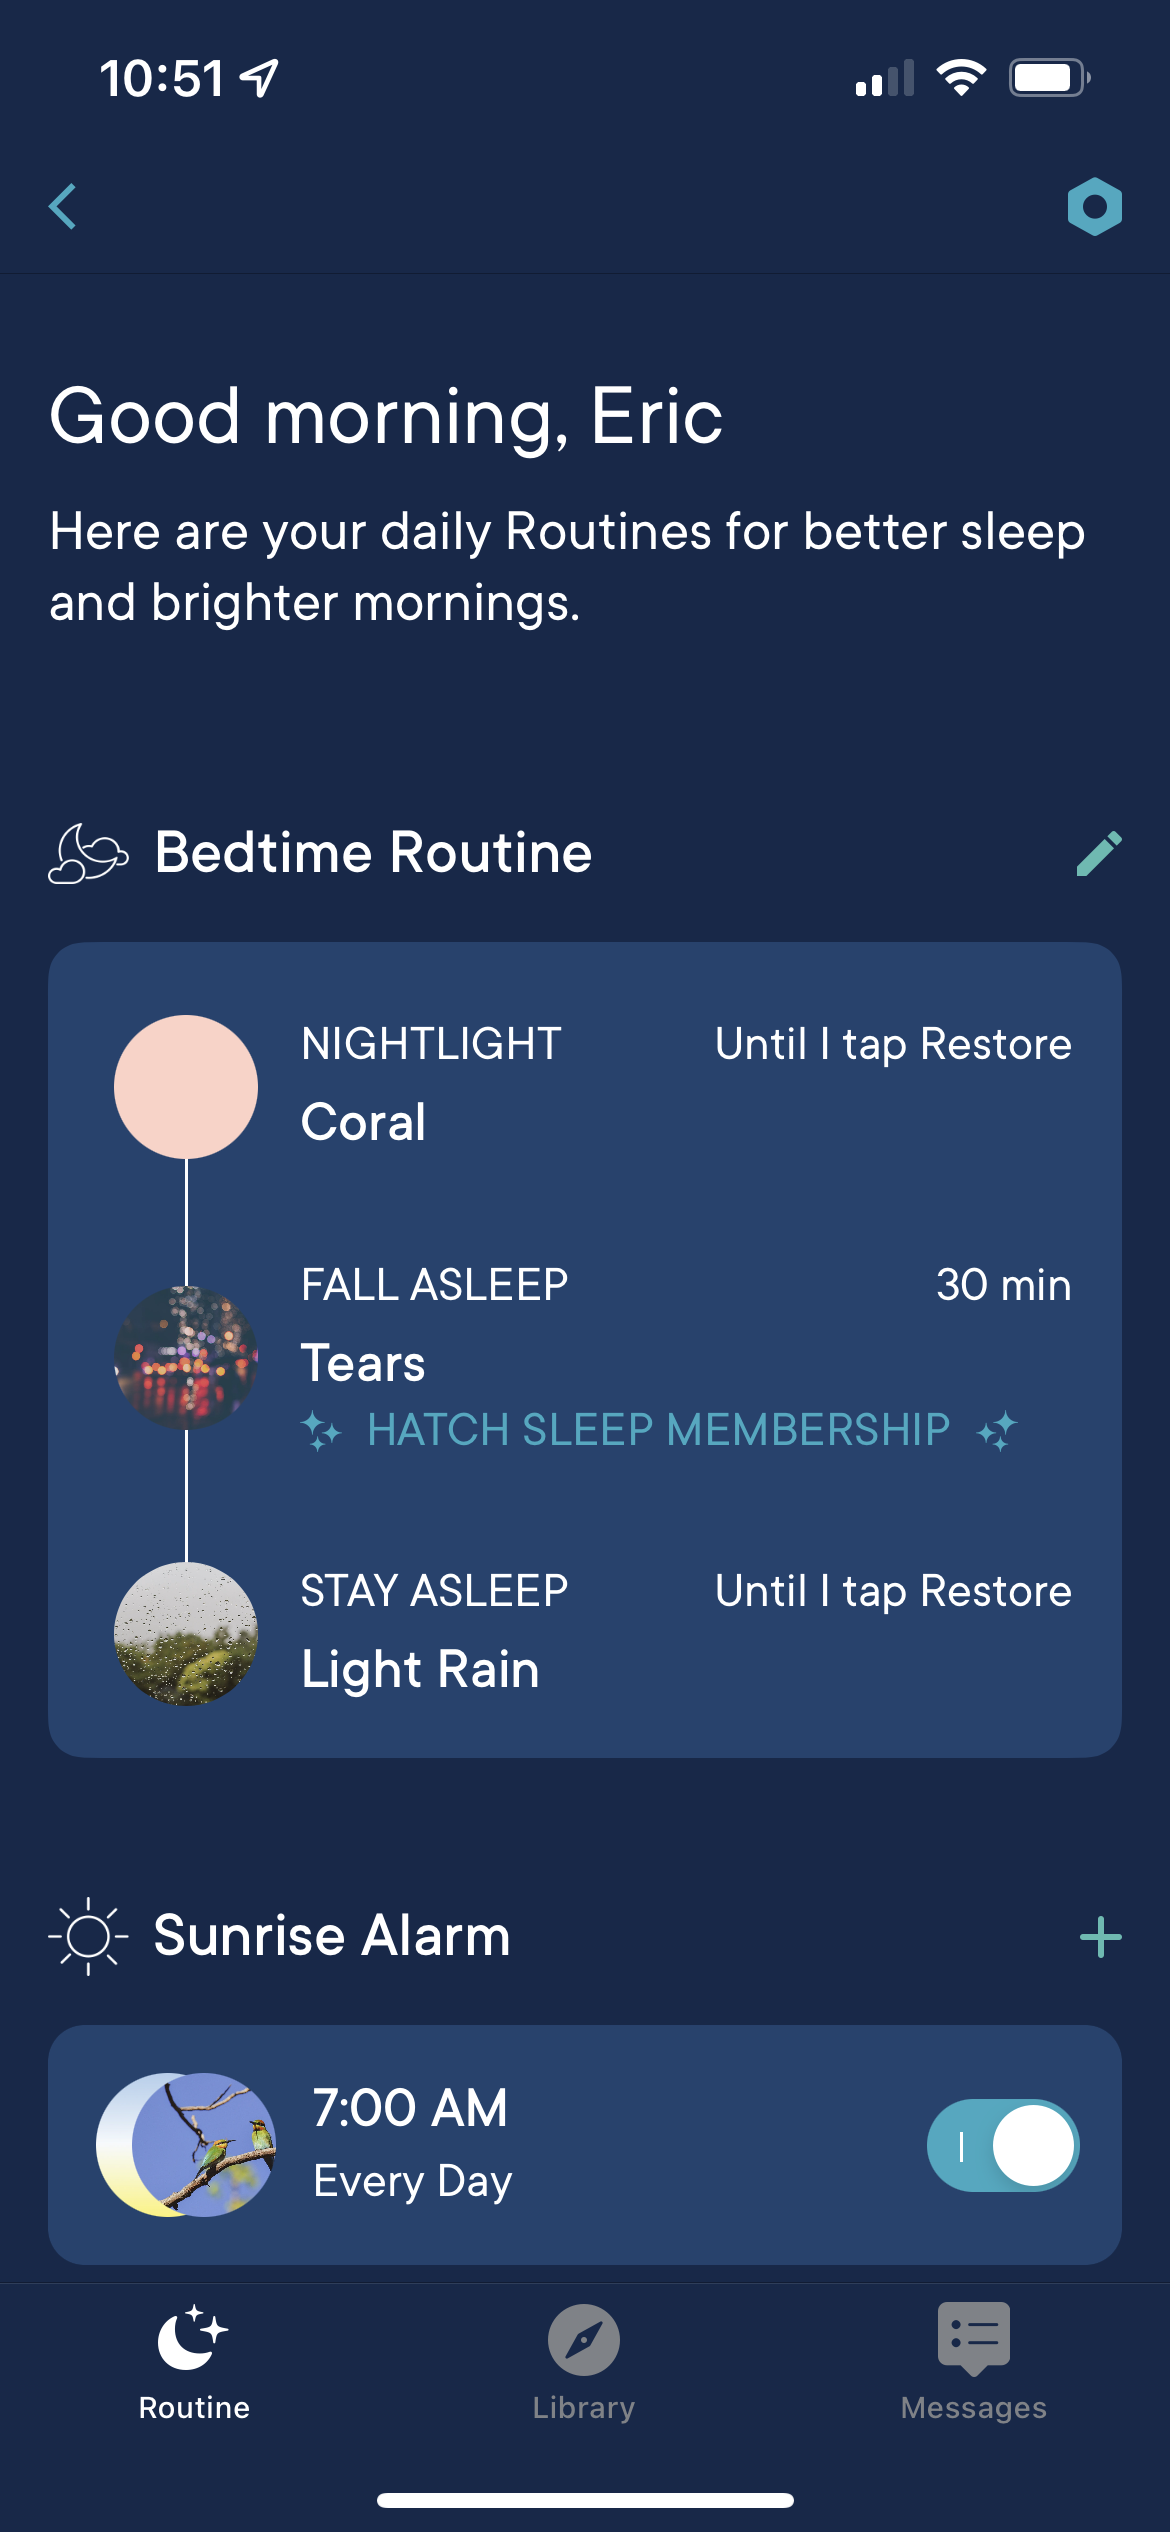 Restore_Routine_Overview.PNG